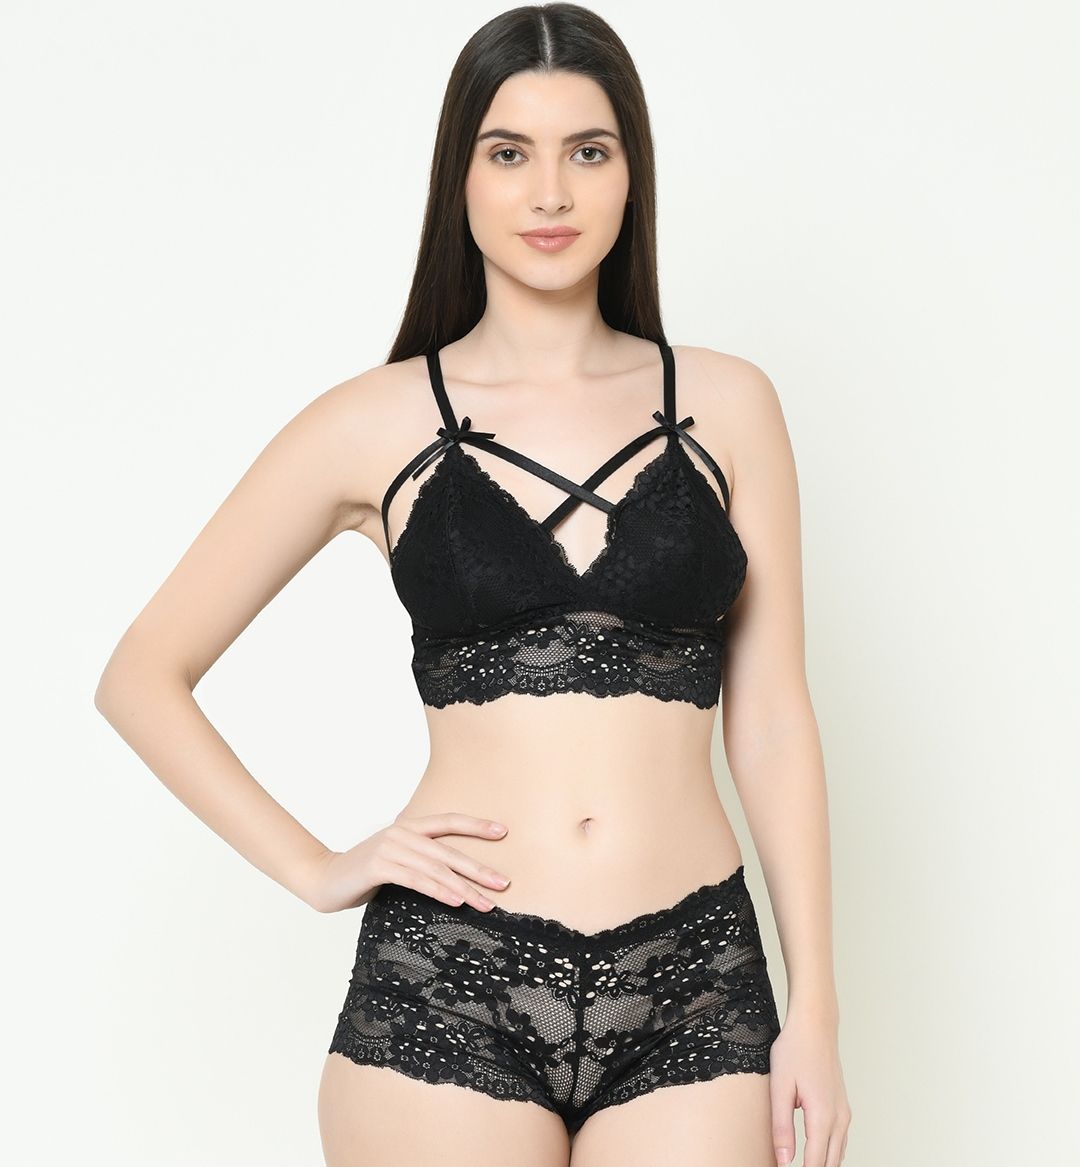 Intimo Lingerie